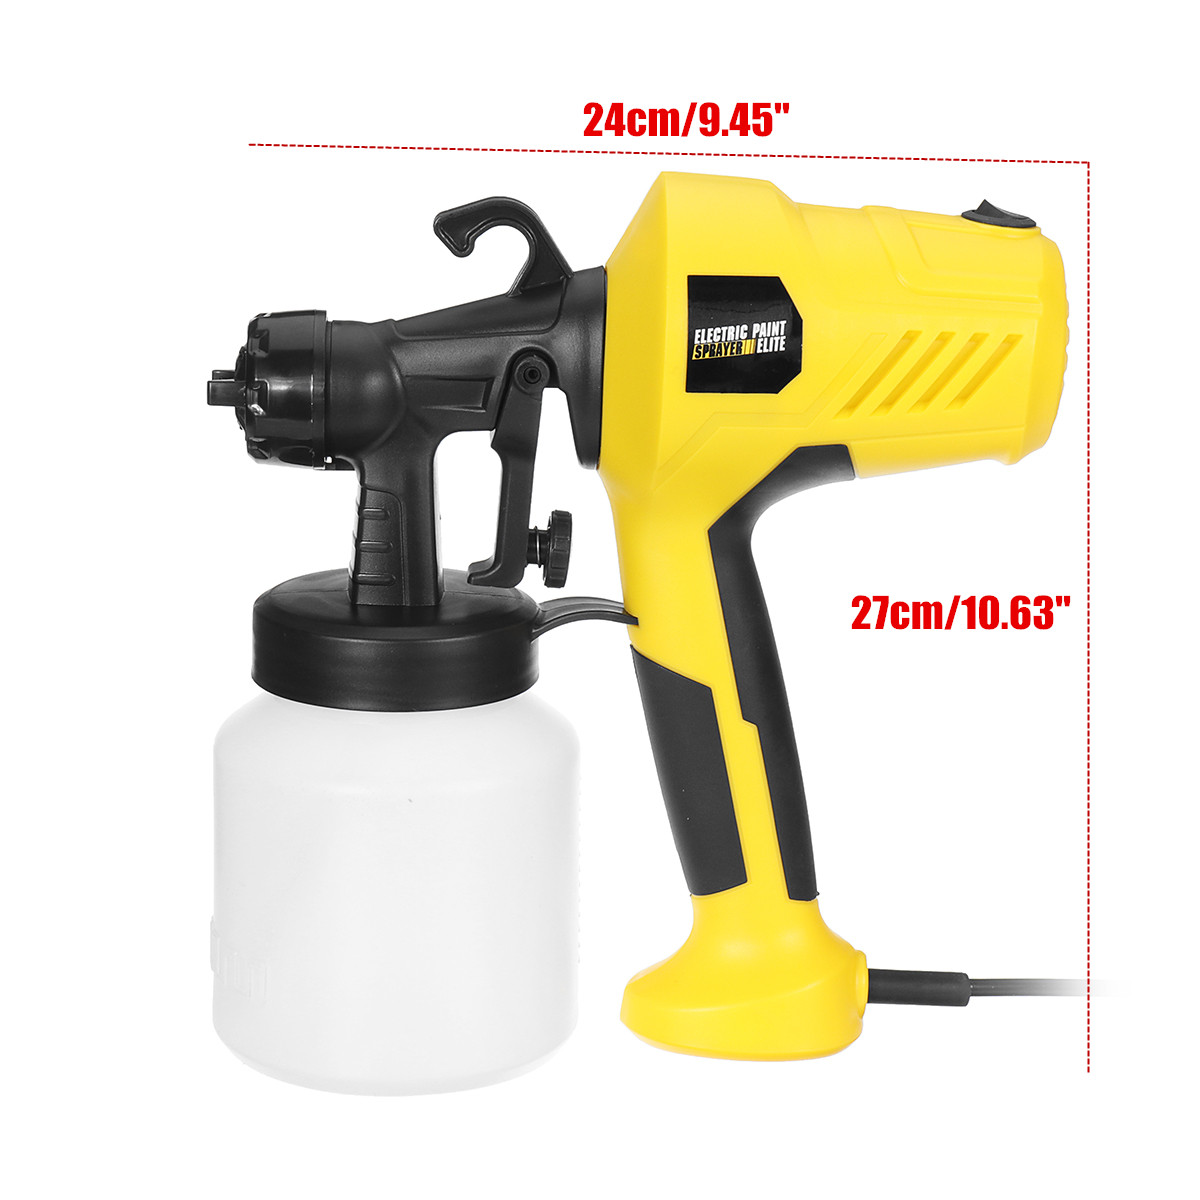 600W Electric Spray Paint Sprayer For Cars Wood Furniture Wall Woodworking 55